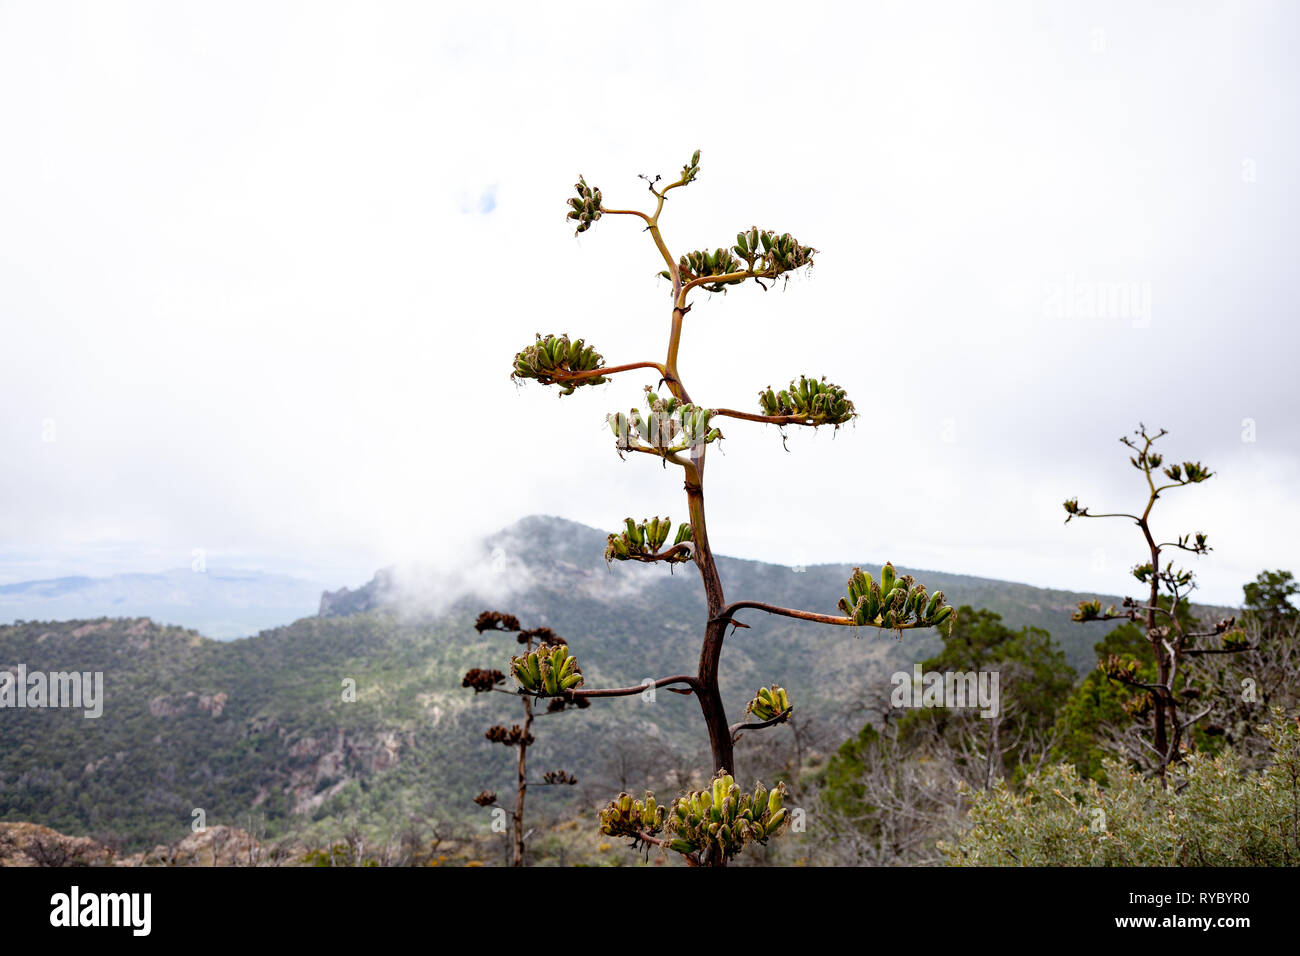 A yucca plant high up in the cloudy mountains of Big Bend National Park. Stock Photo